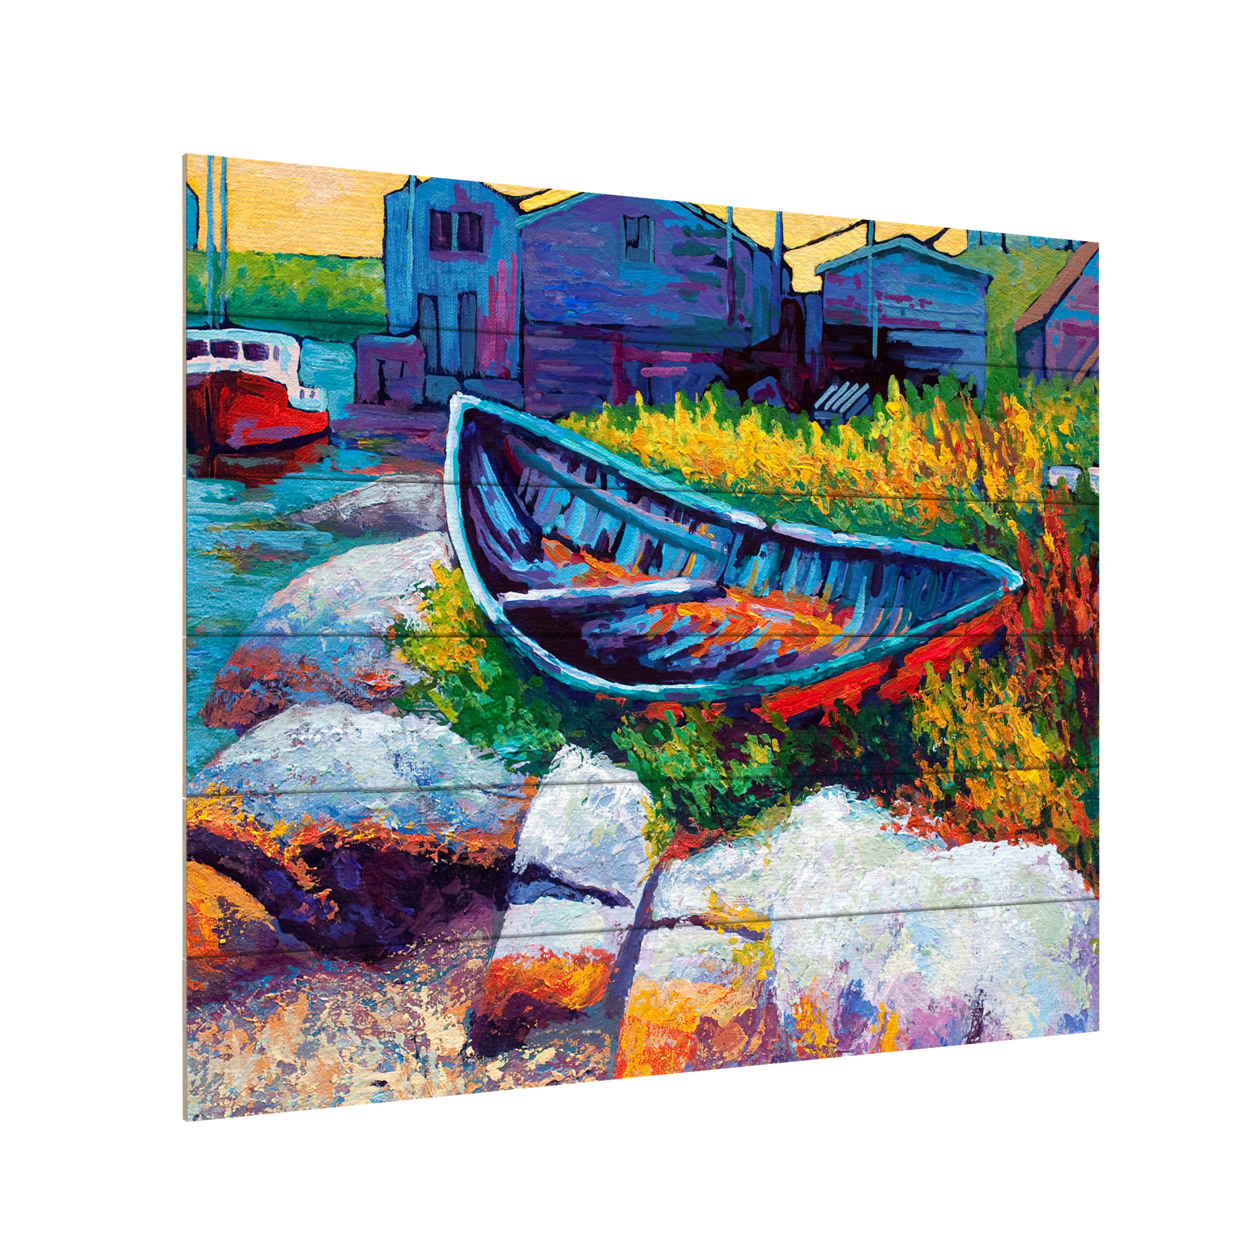 Wooden Slat Art 18 X 22 Inches Titled Judy East Coast Boat Faa Ready To Hang Home Decor Picture